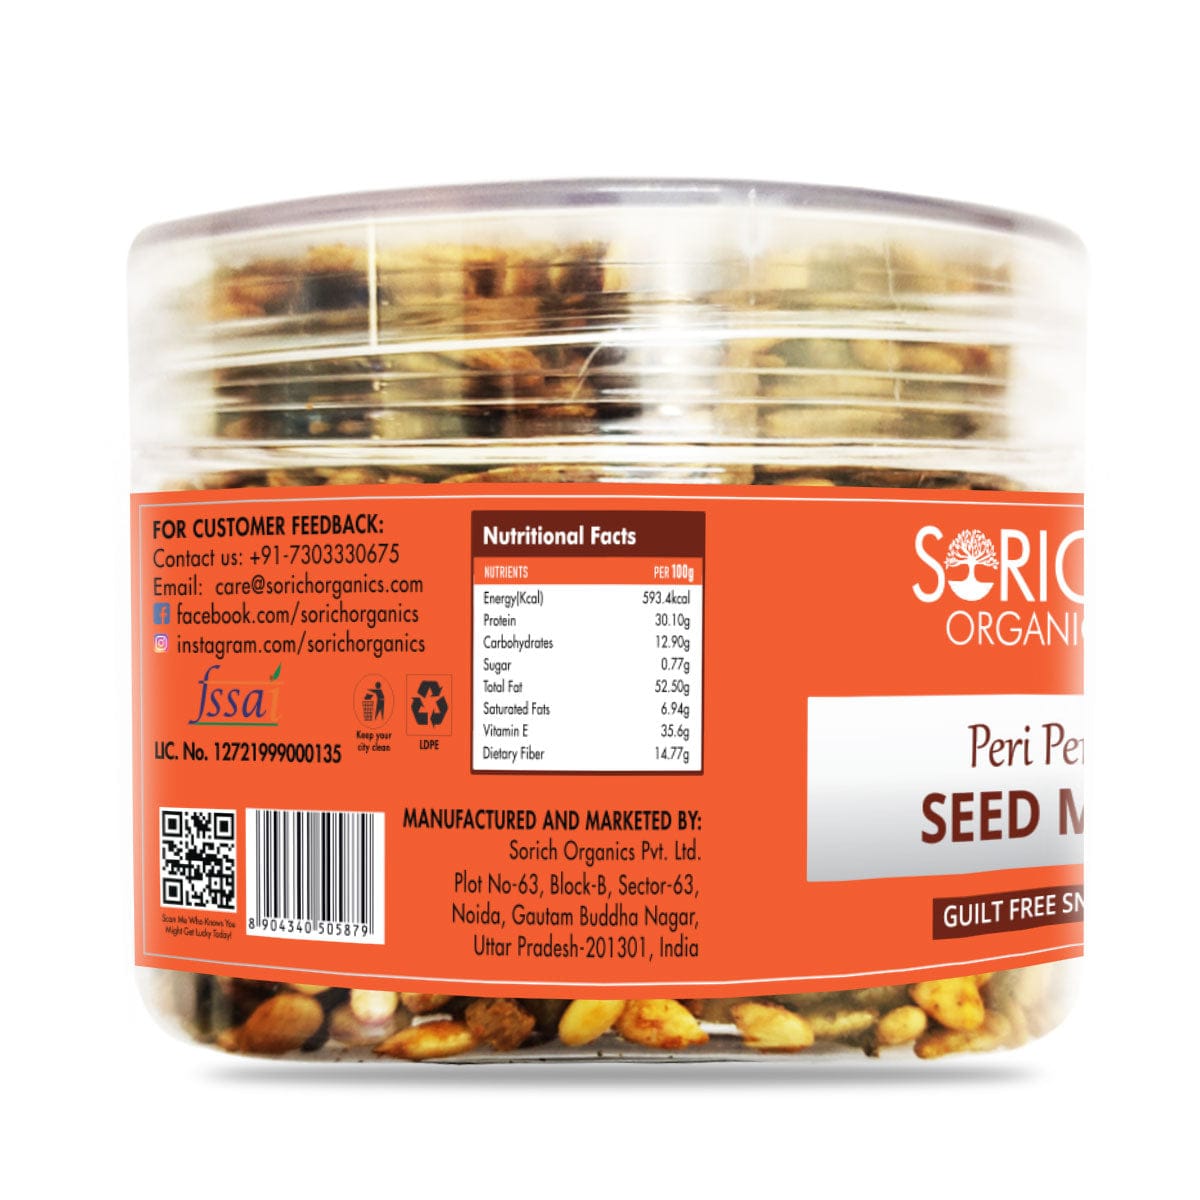 peri peri seed mix nutrition facts